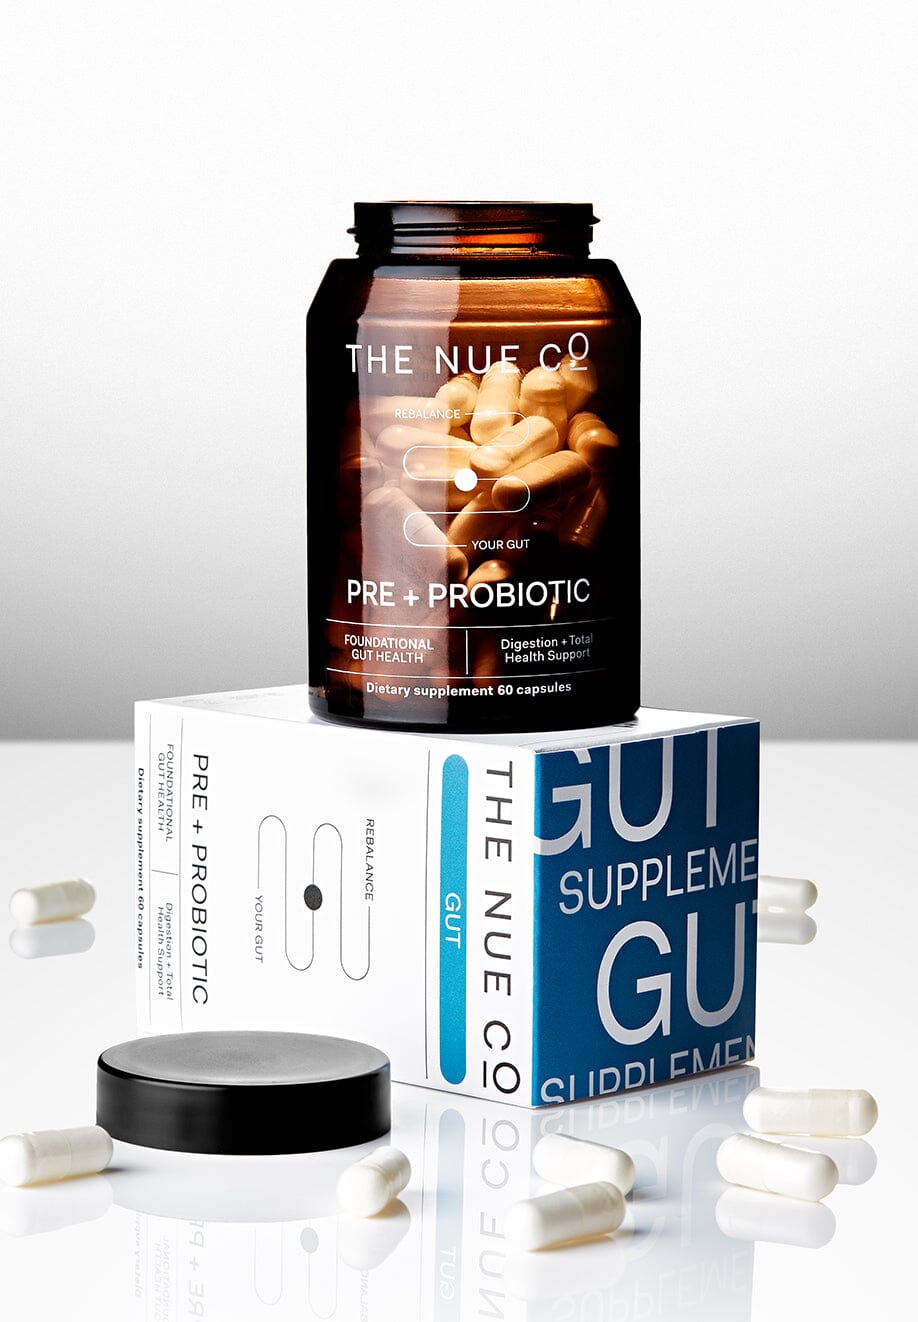 PREBIOTIC + PROBIOTIC 3 Month Subscription Only The Nue Co. 